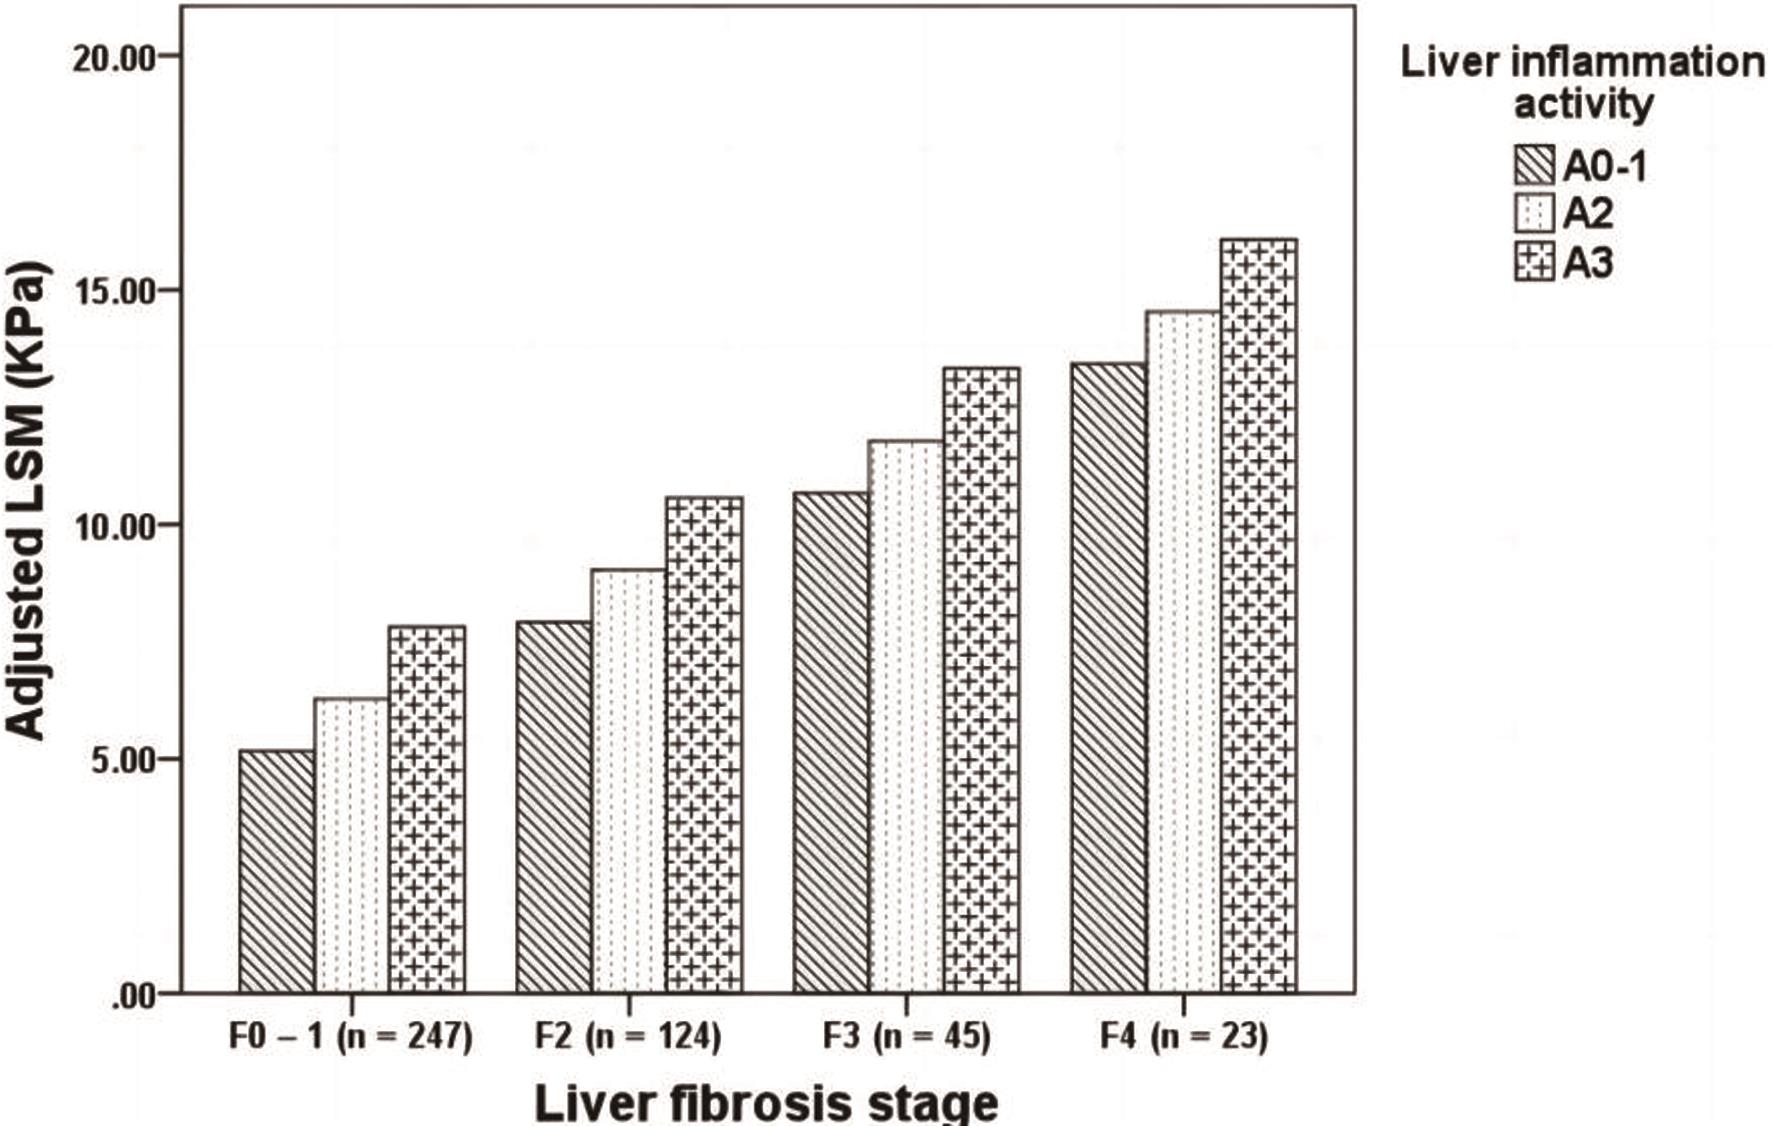 Comparison of adjusted liver stiffness measurement (LSM) values in cohort I of subjects with different liver inflammation activities at the same liver fibrosis stage.